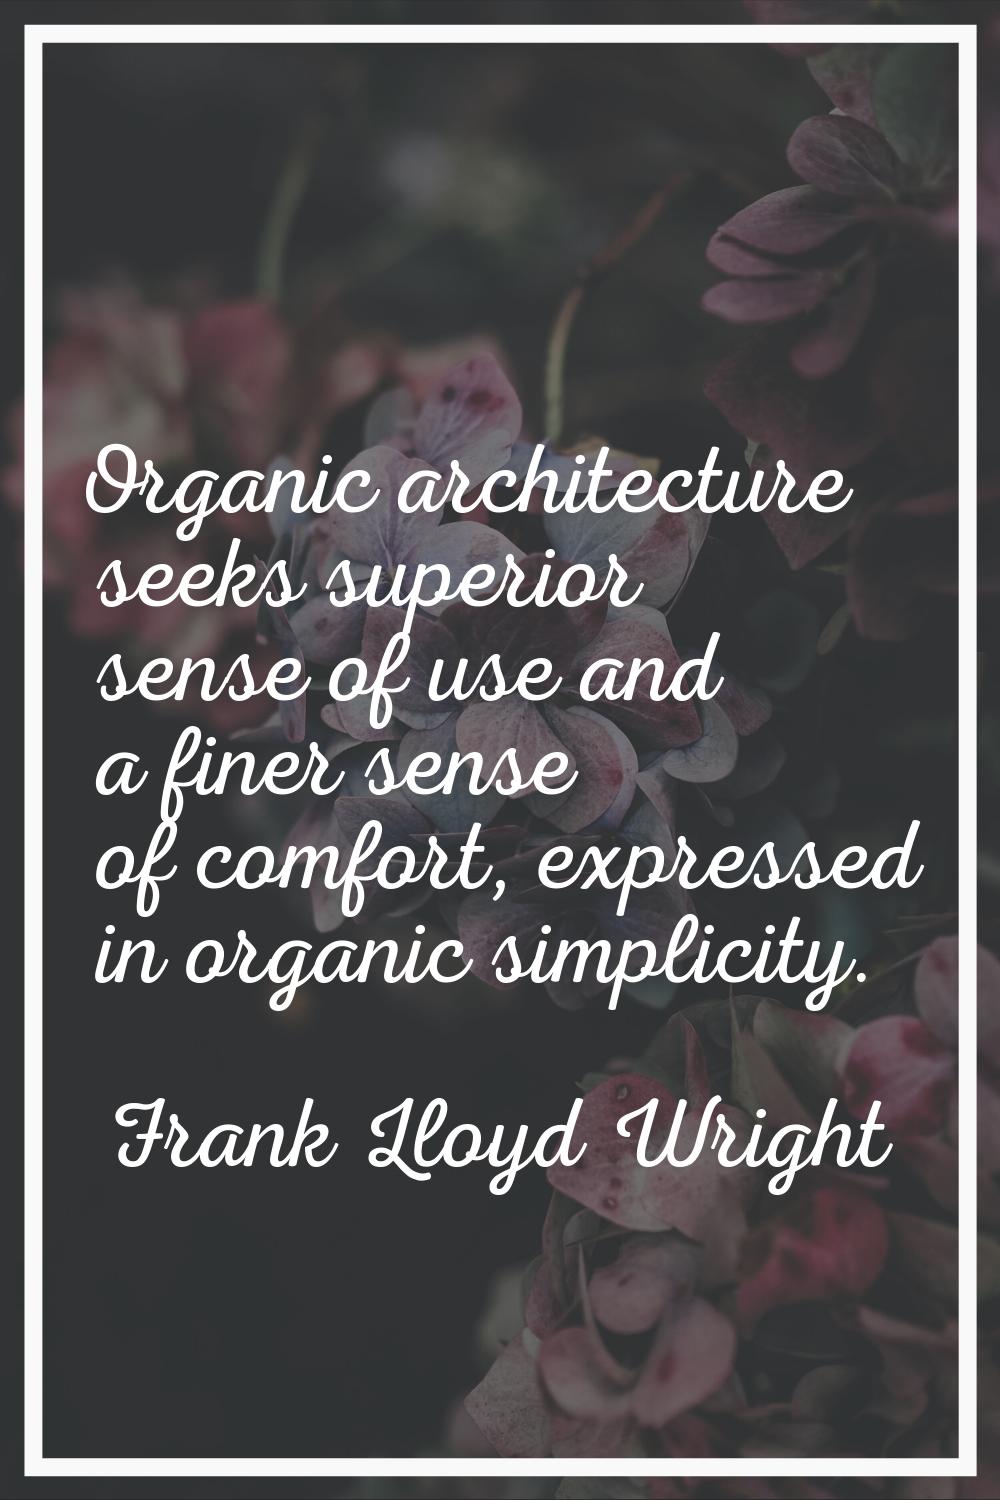 Organic architecture seeks superior sense of use and a finer sense of comfort, expressed in organic